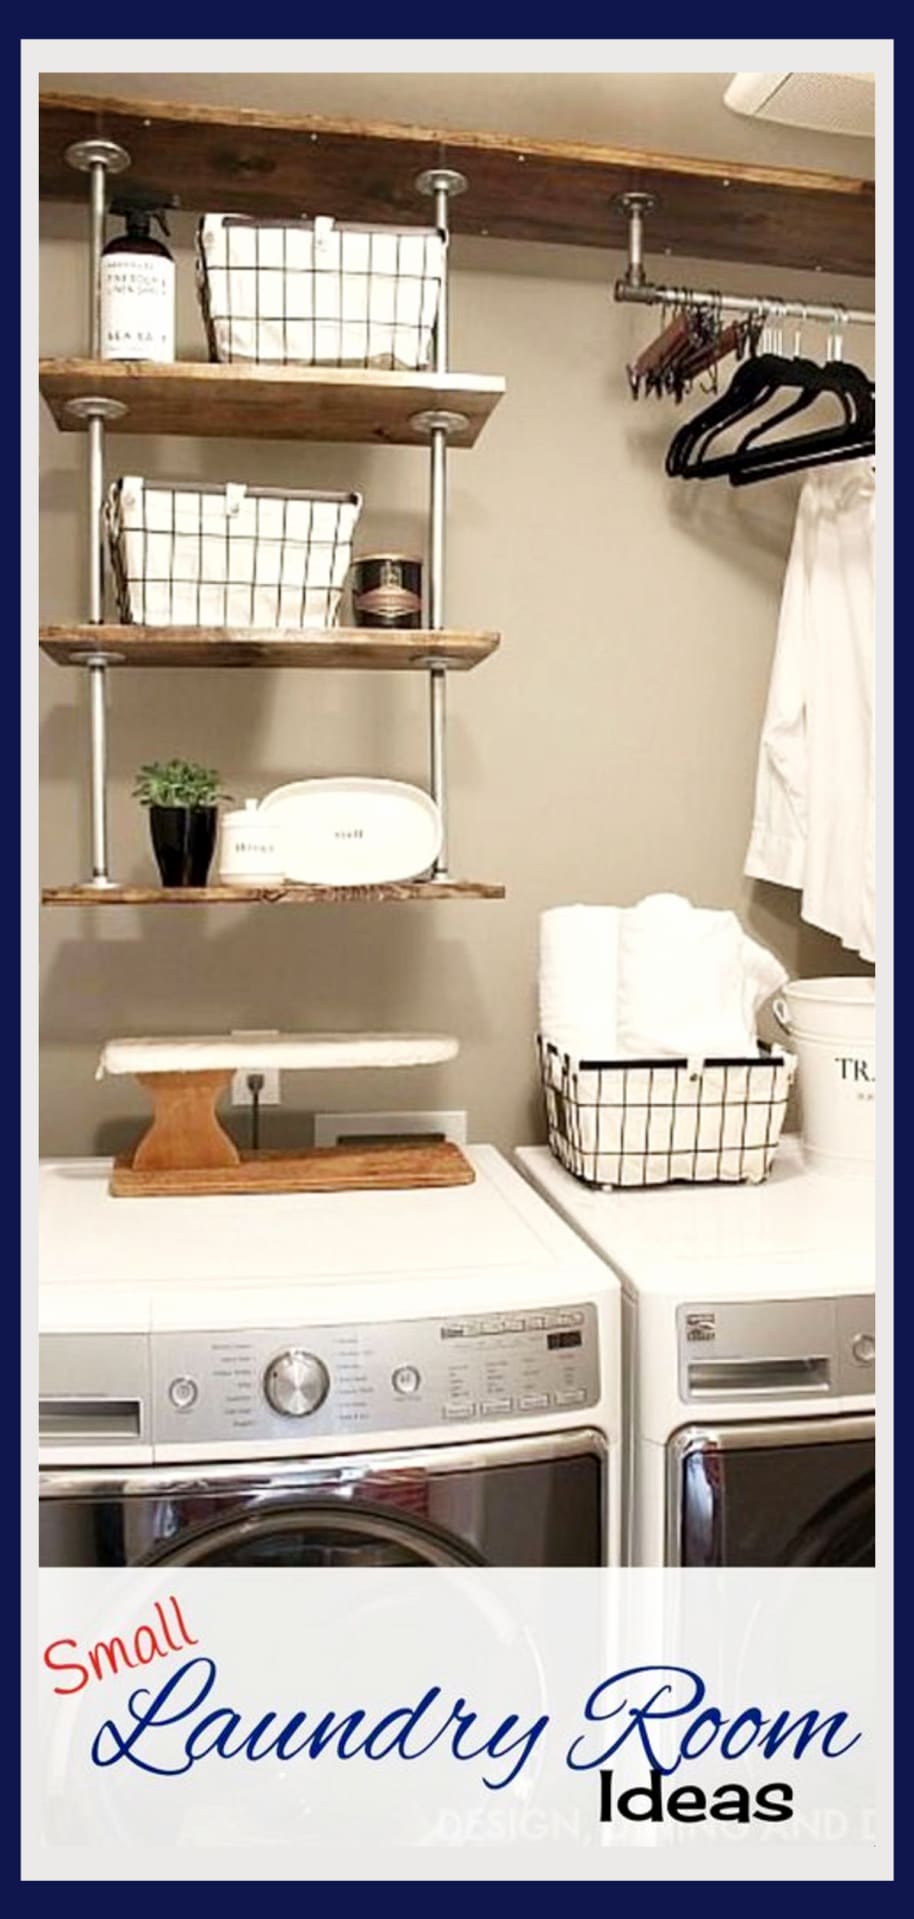 Tiny laundry room space-saving idea – hanging pipe shelves to get lots more space in this small laundry room.